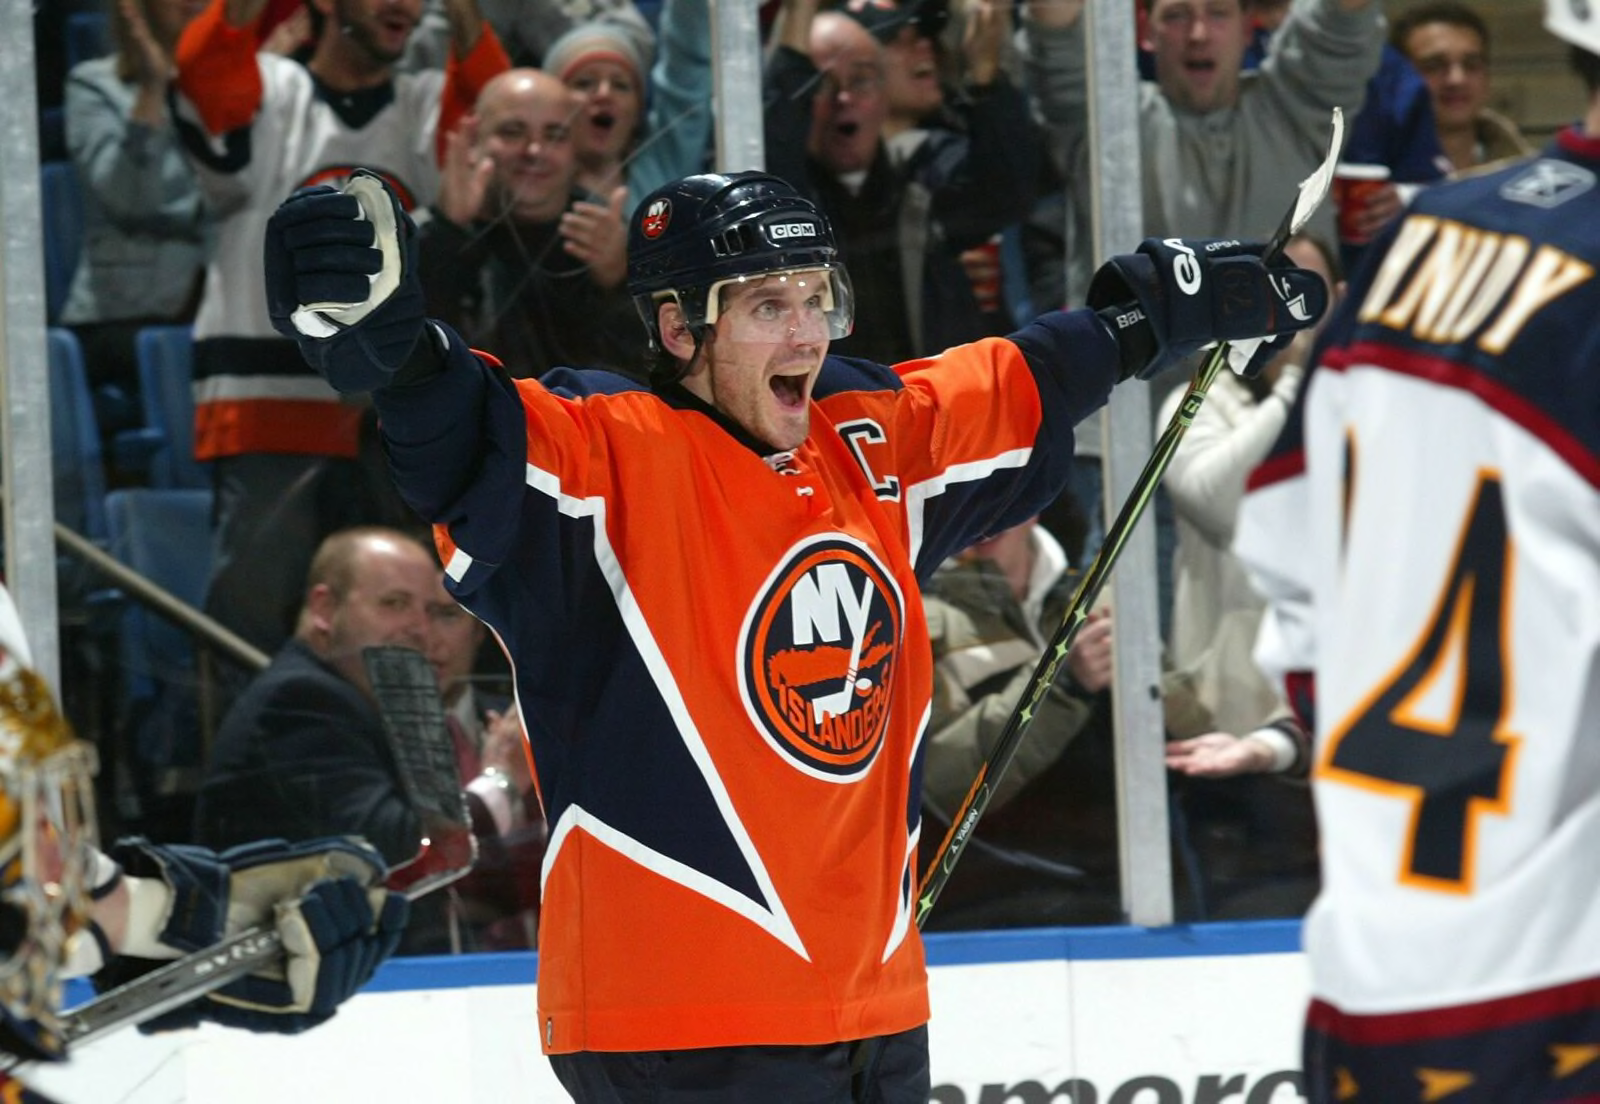 One of the worst uniform matchups in NHL history- Islanders